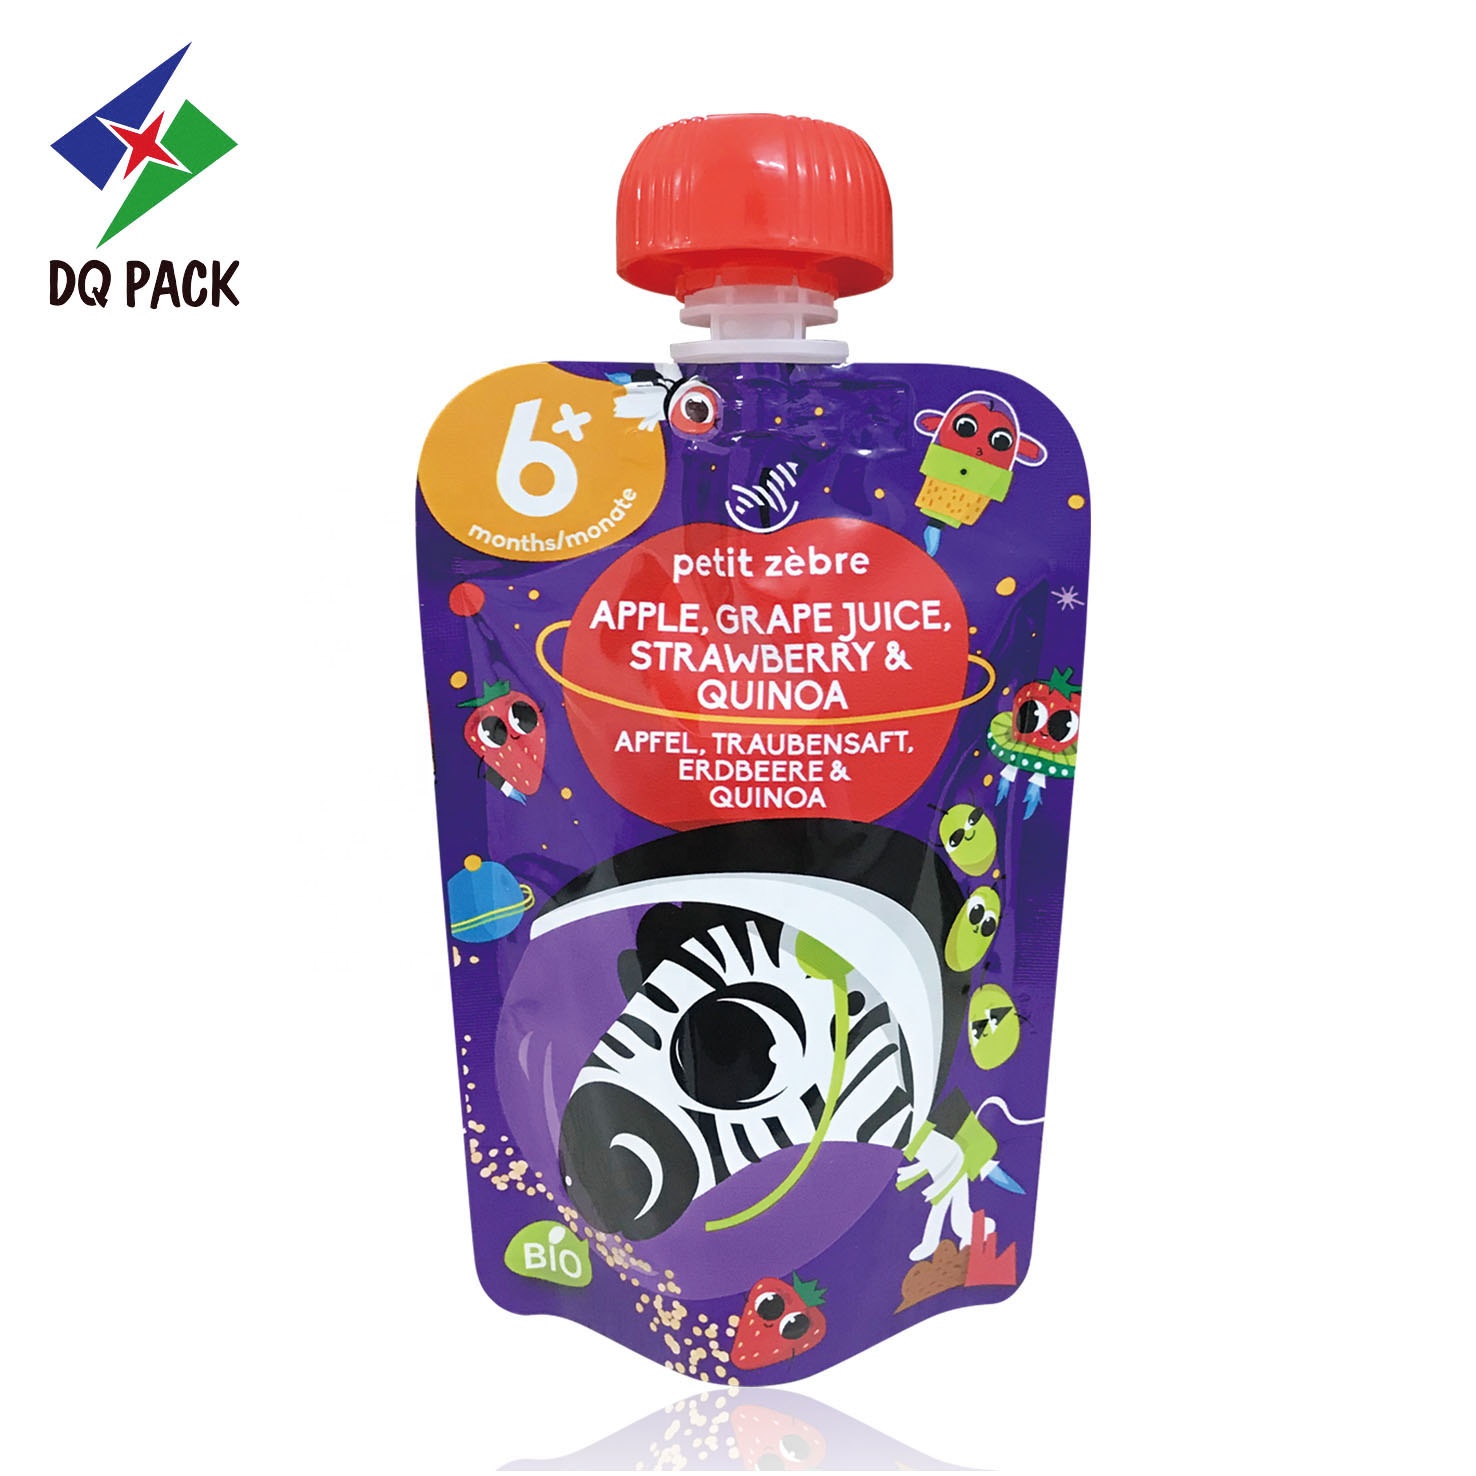 DQ PACK custom  printing  aluminum foil packaging screw nozzle spout pouch bag fruit juice drink packaging